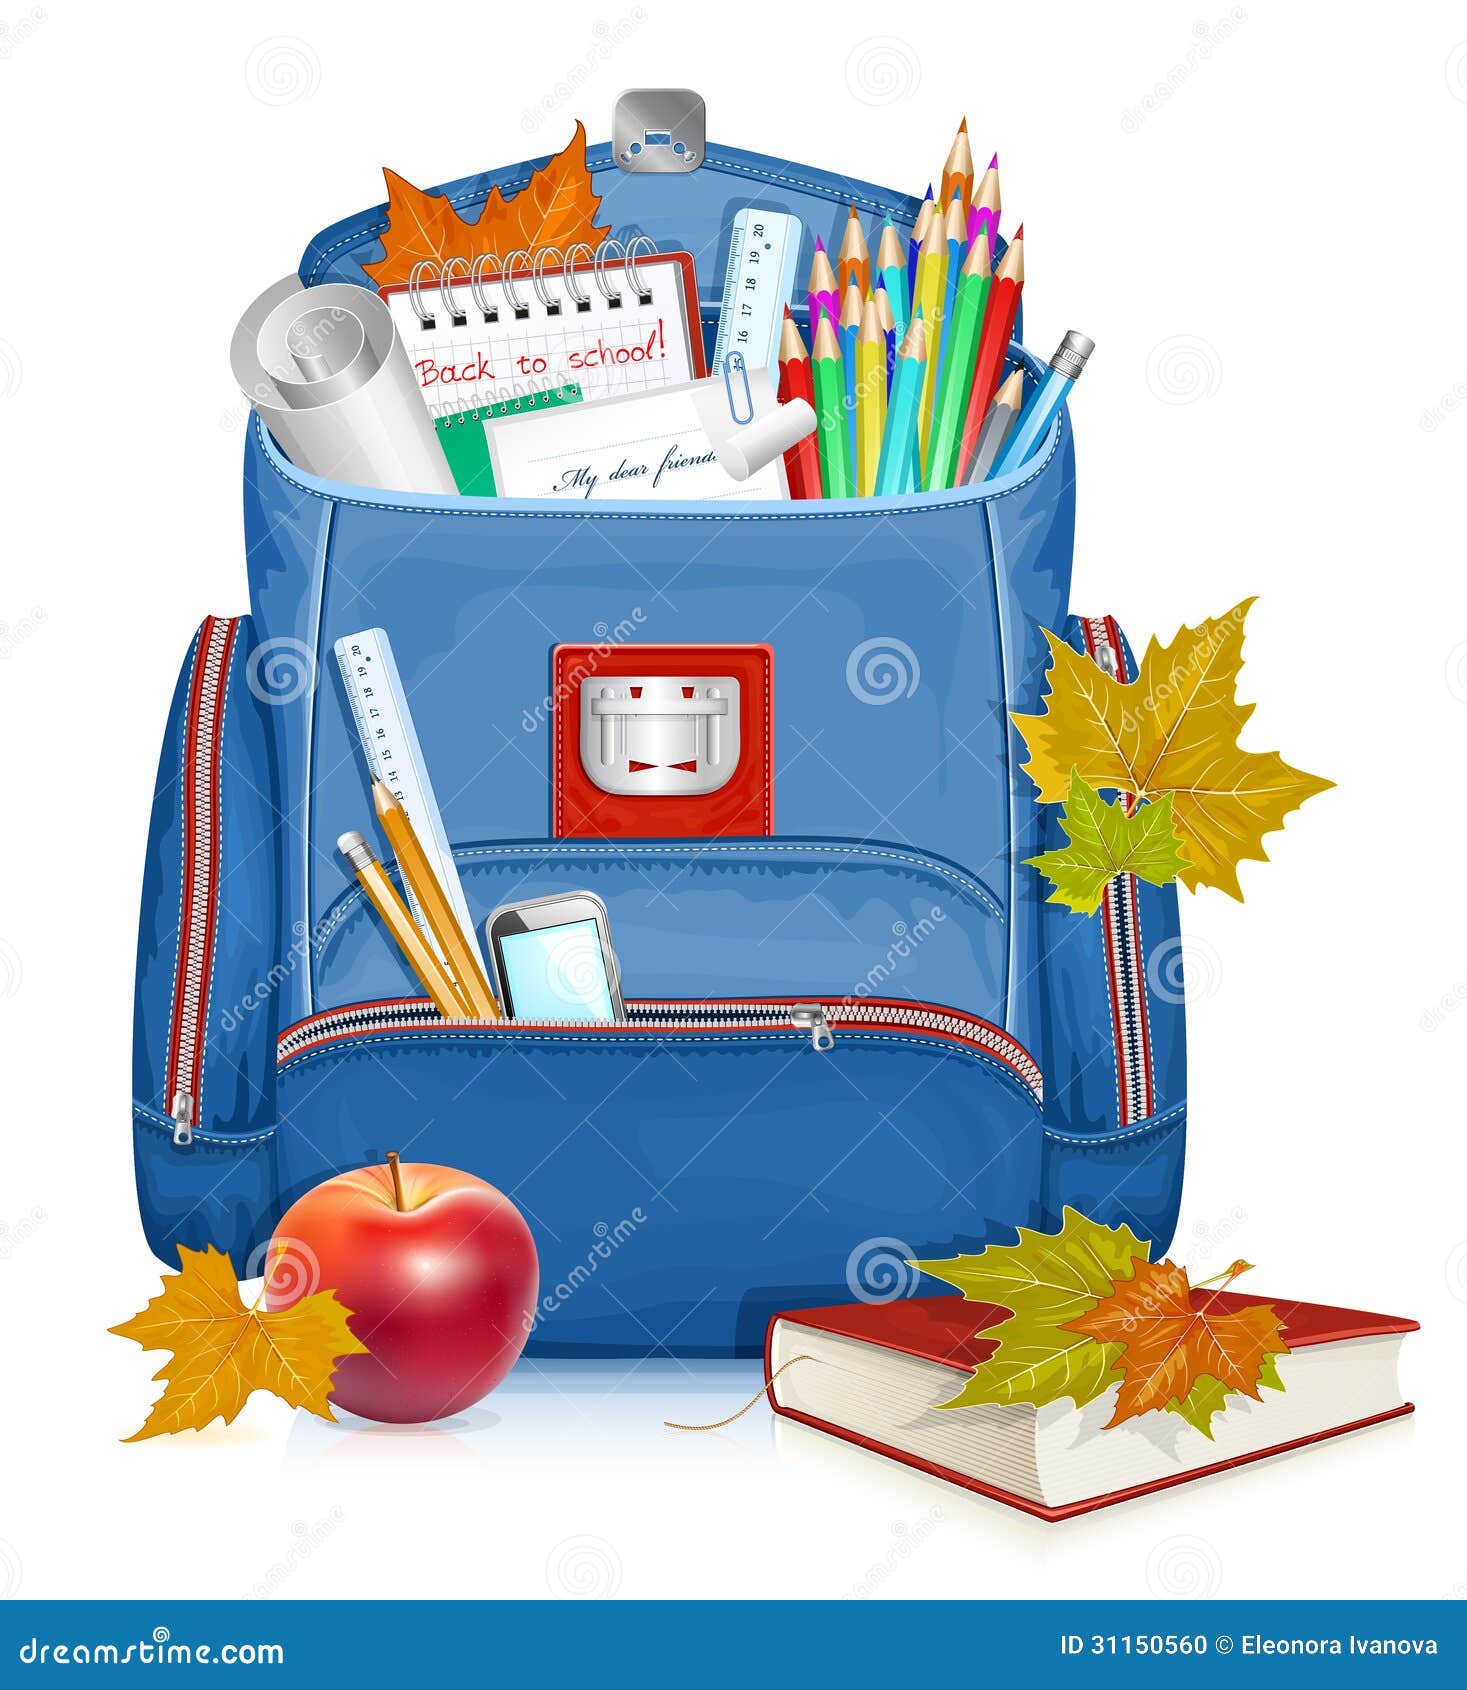 classroom objects clipart free - photo #15